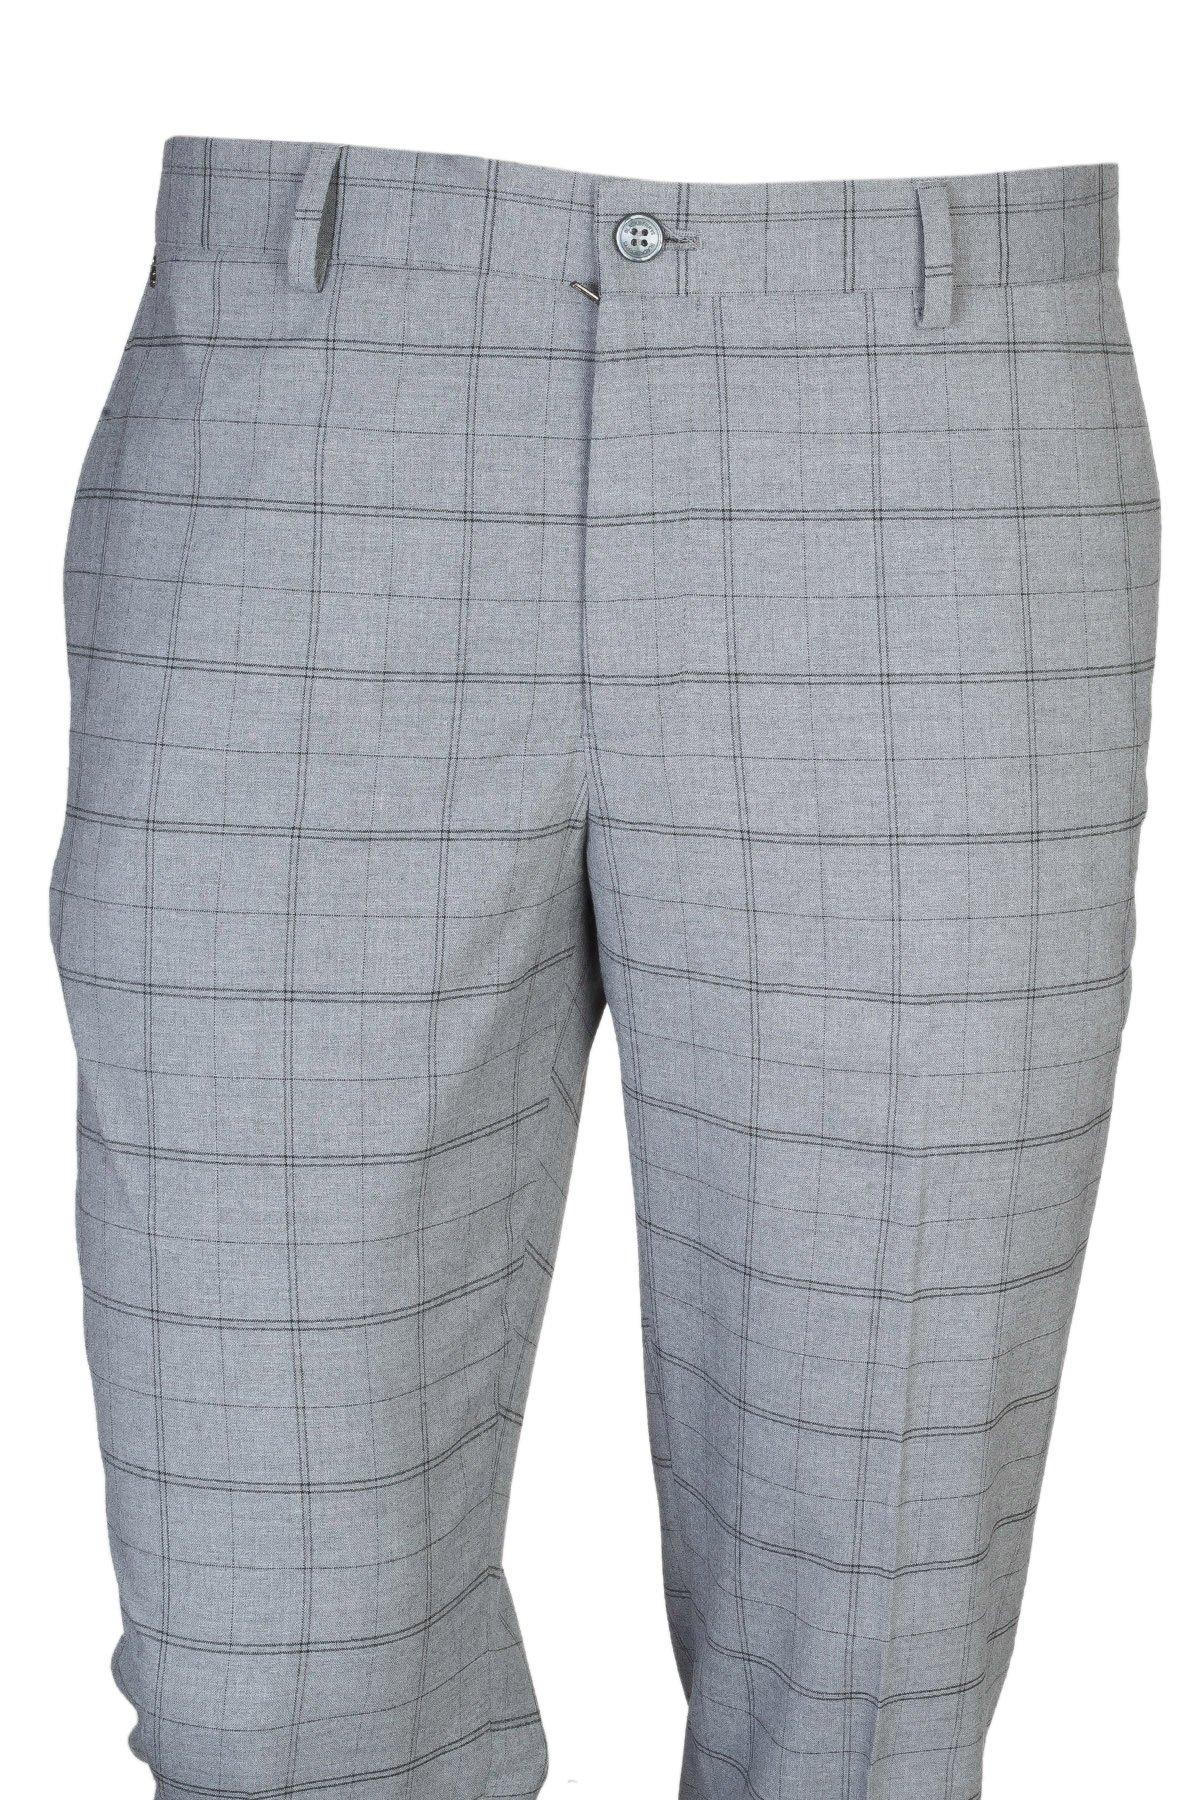 Grey Colored Checks Finish Smart Casual Trousers